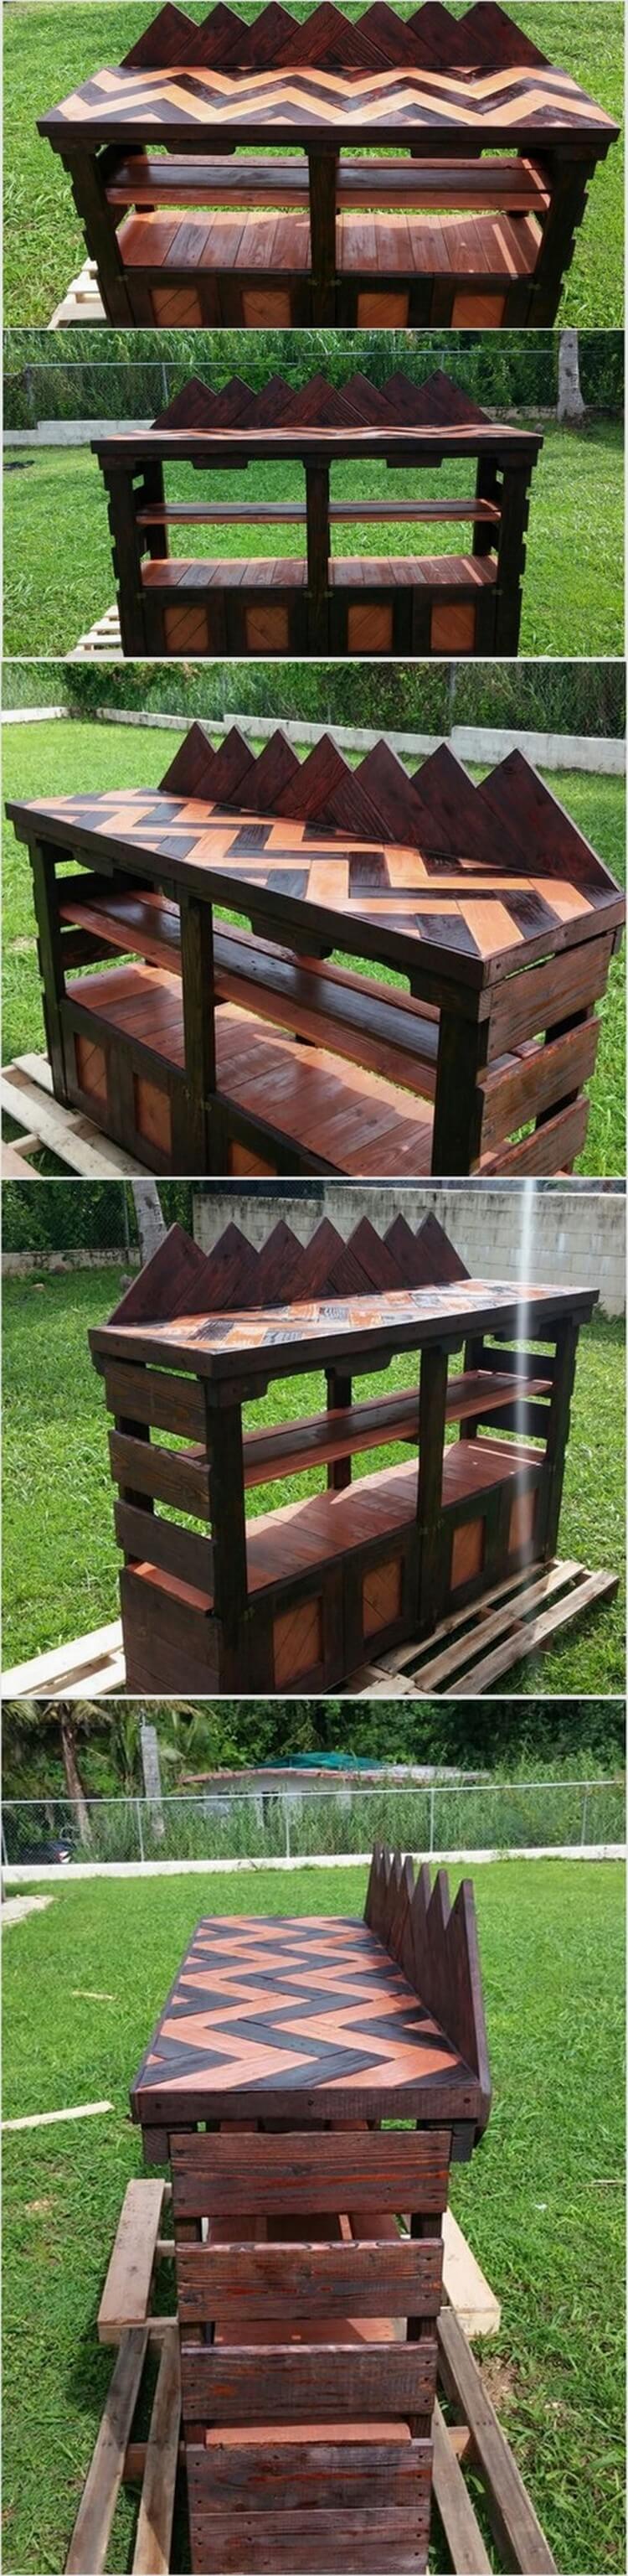 Prepare Cute Outdoor Bar with Used Wood Pallets